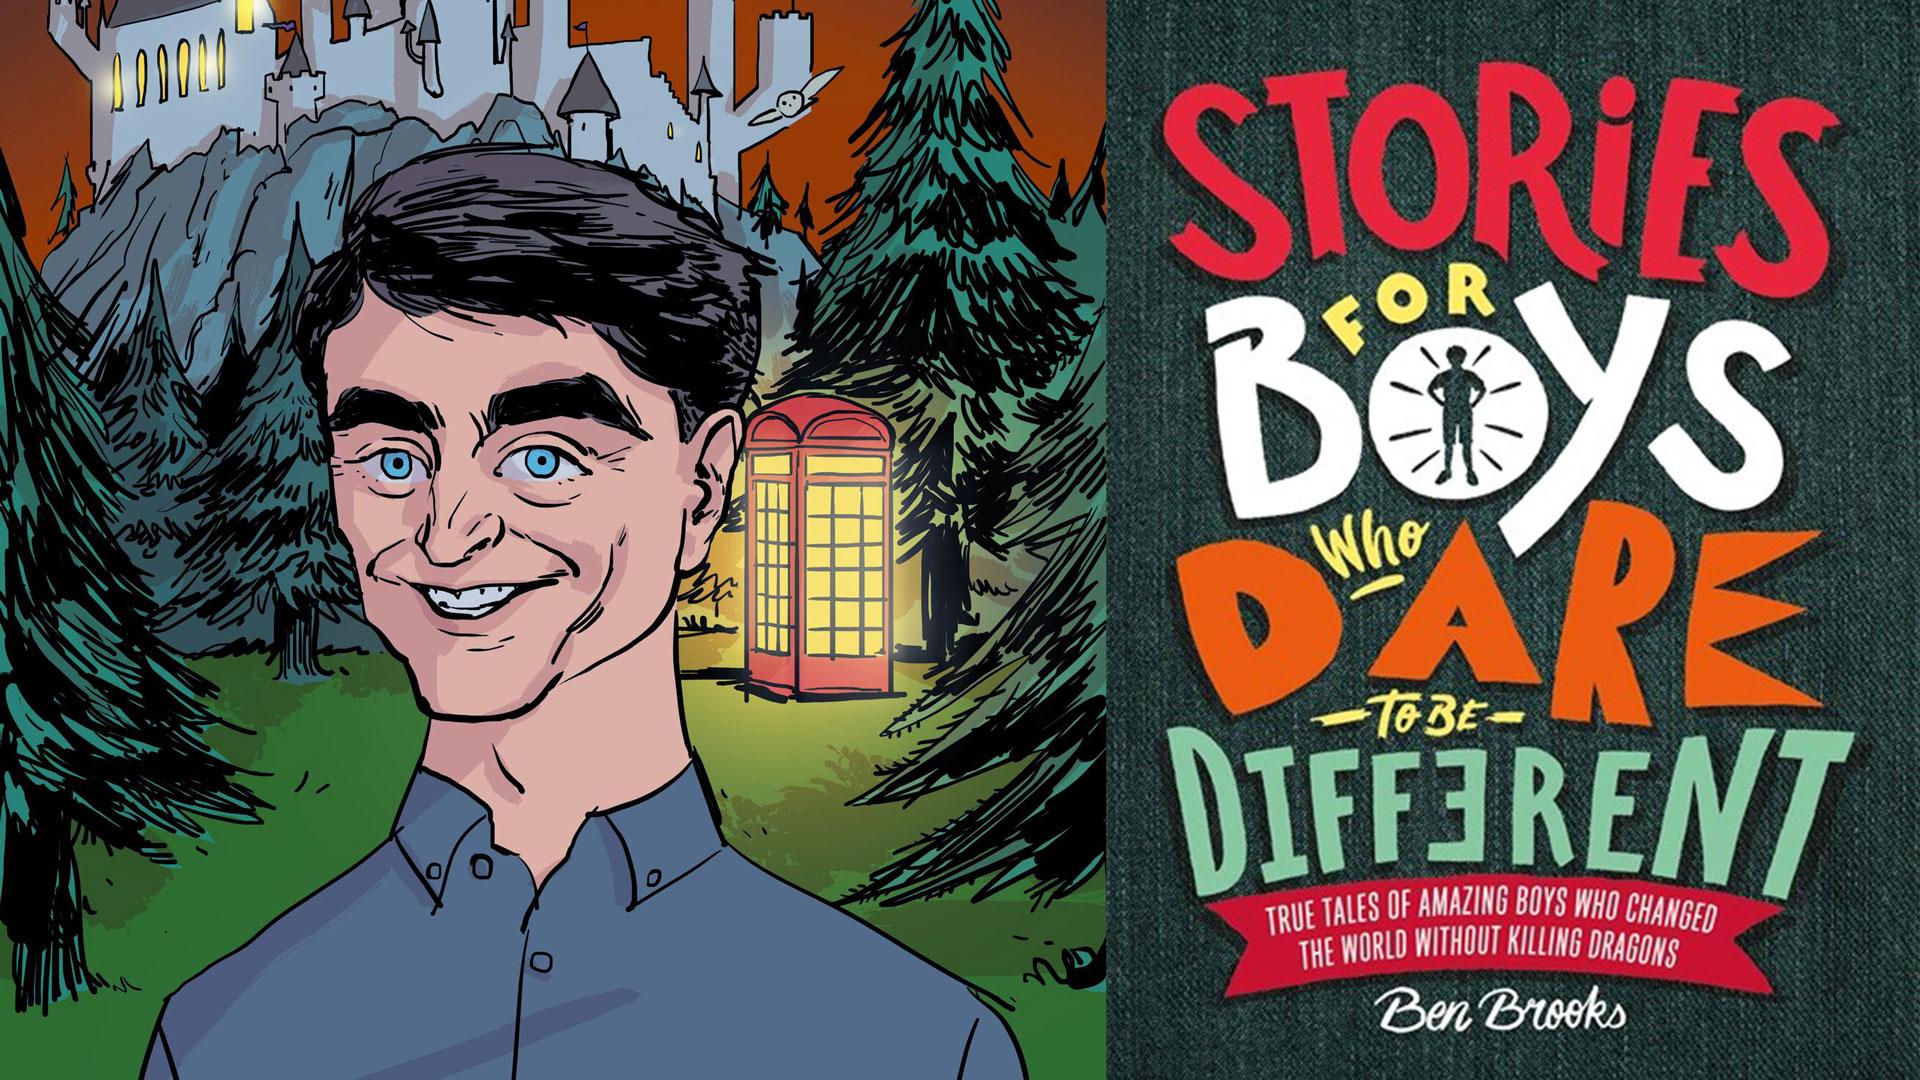 Illustration of Daniel Radcliffe and the Stories for Boys Who Dare to Be Different book jacket.